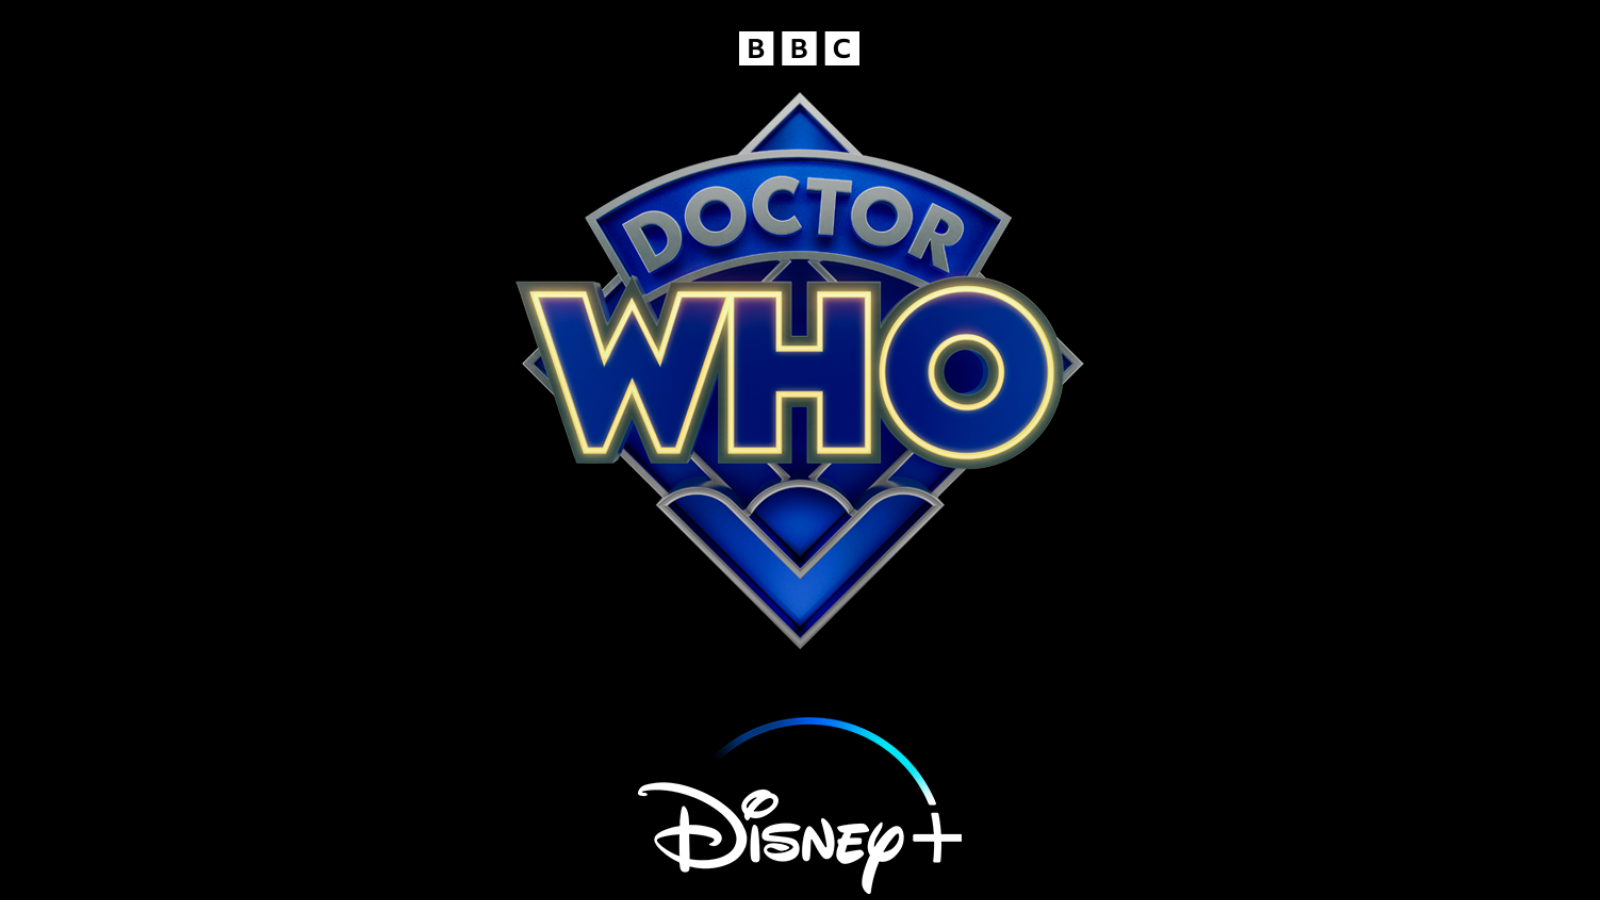 Doctor Who is coming to Disney Plus in 2023